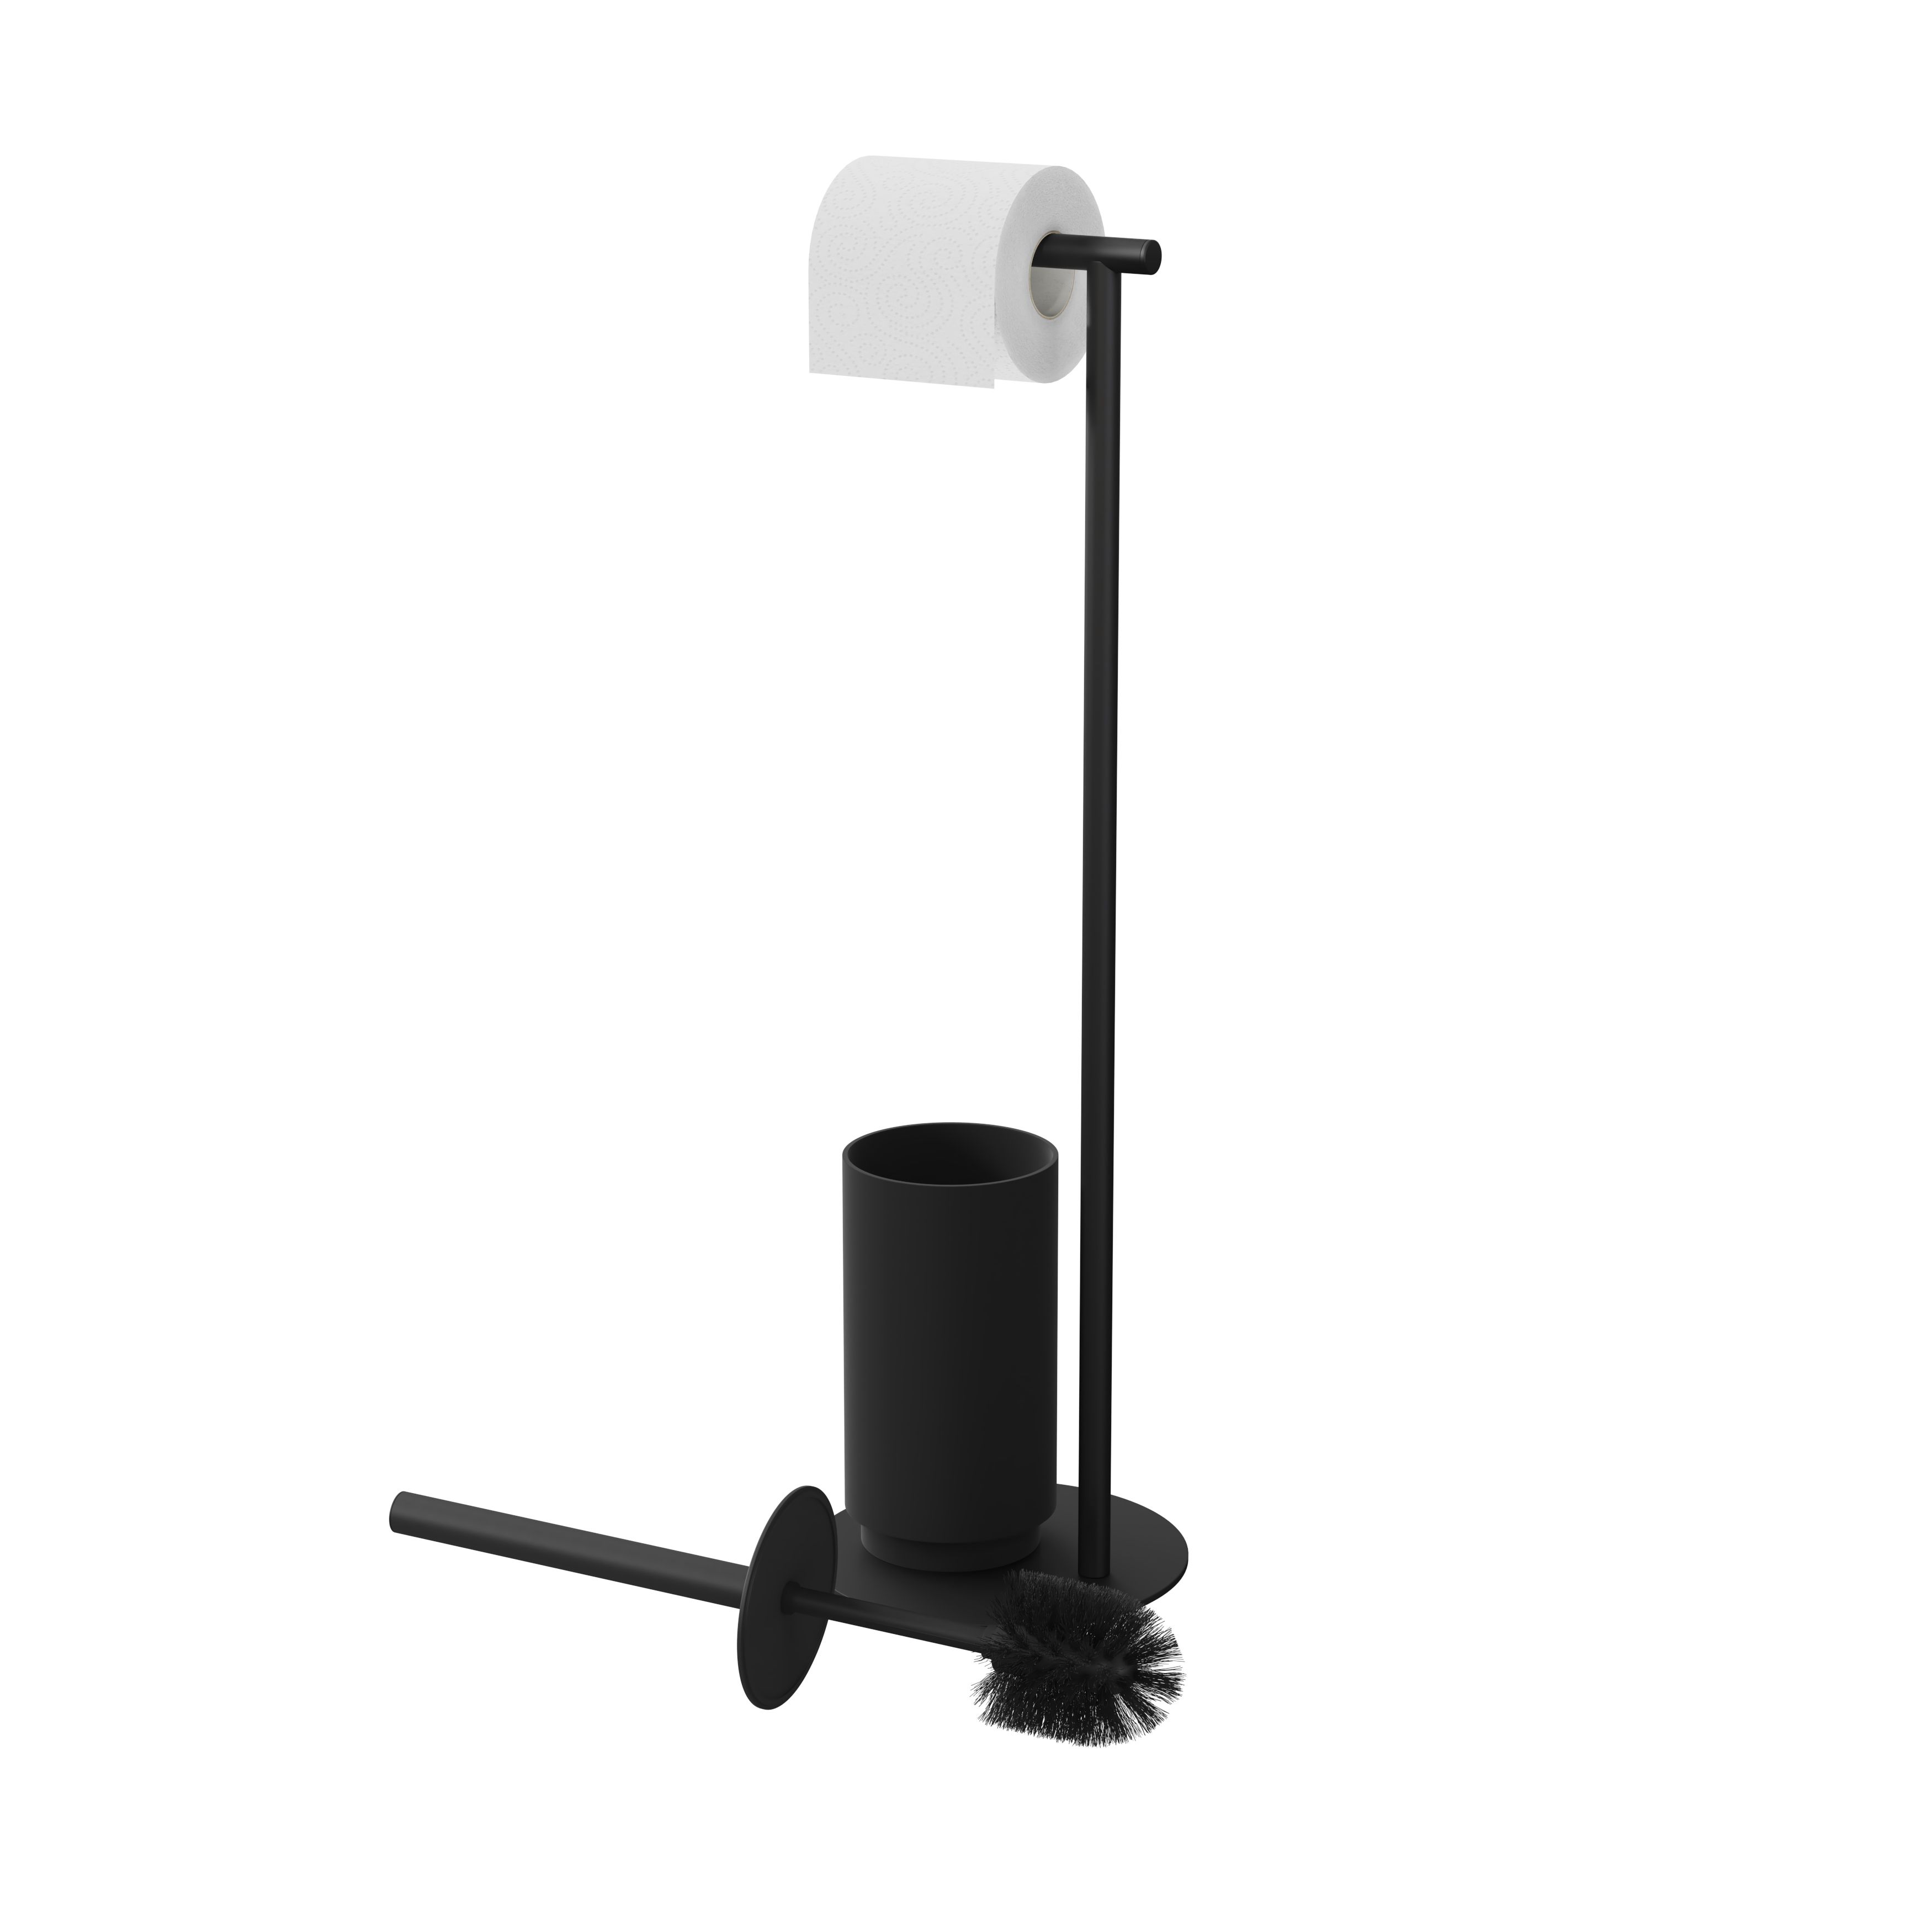 Wenko Toilet Paper Stand with Toilet Brush and Spare Roll Holder, Toilet Paper Holder Stand, Toilet Paper Roll Holder, Matt Black, 7.09 x 27.56 x